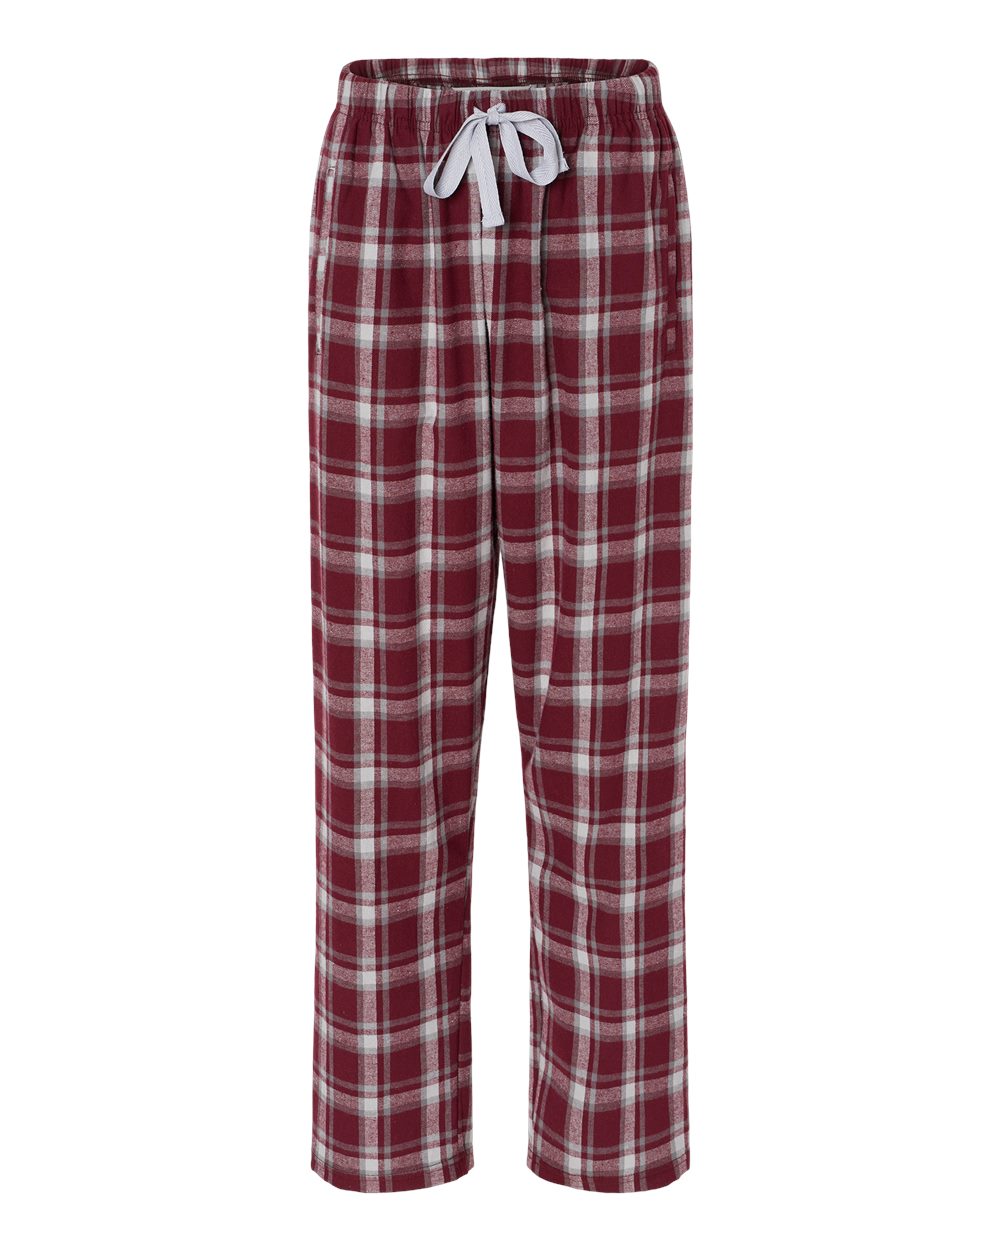 Boxercraft Ladies Haley Flannel Pants Heritage Maroon Color Pants with Custom Text